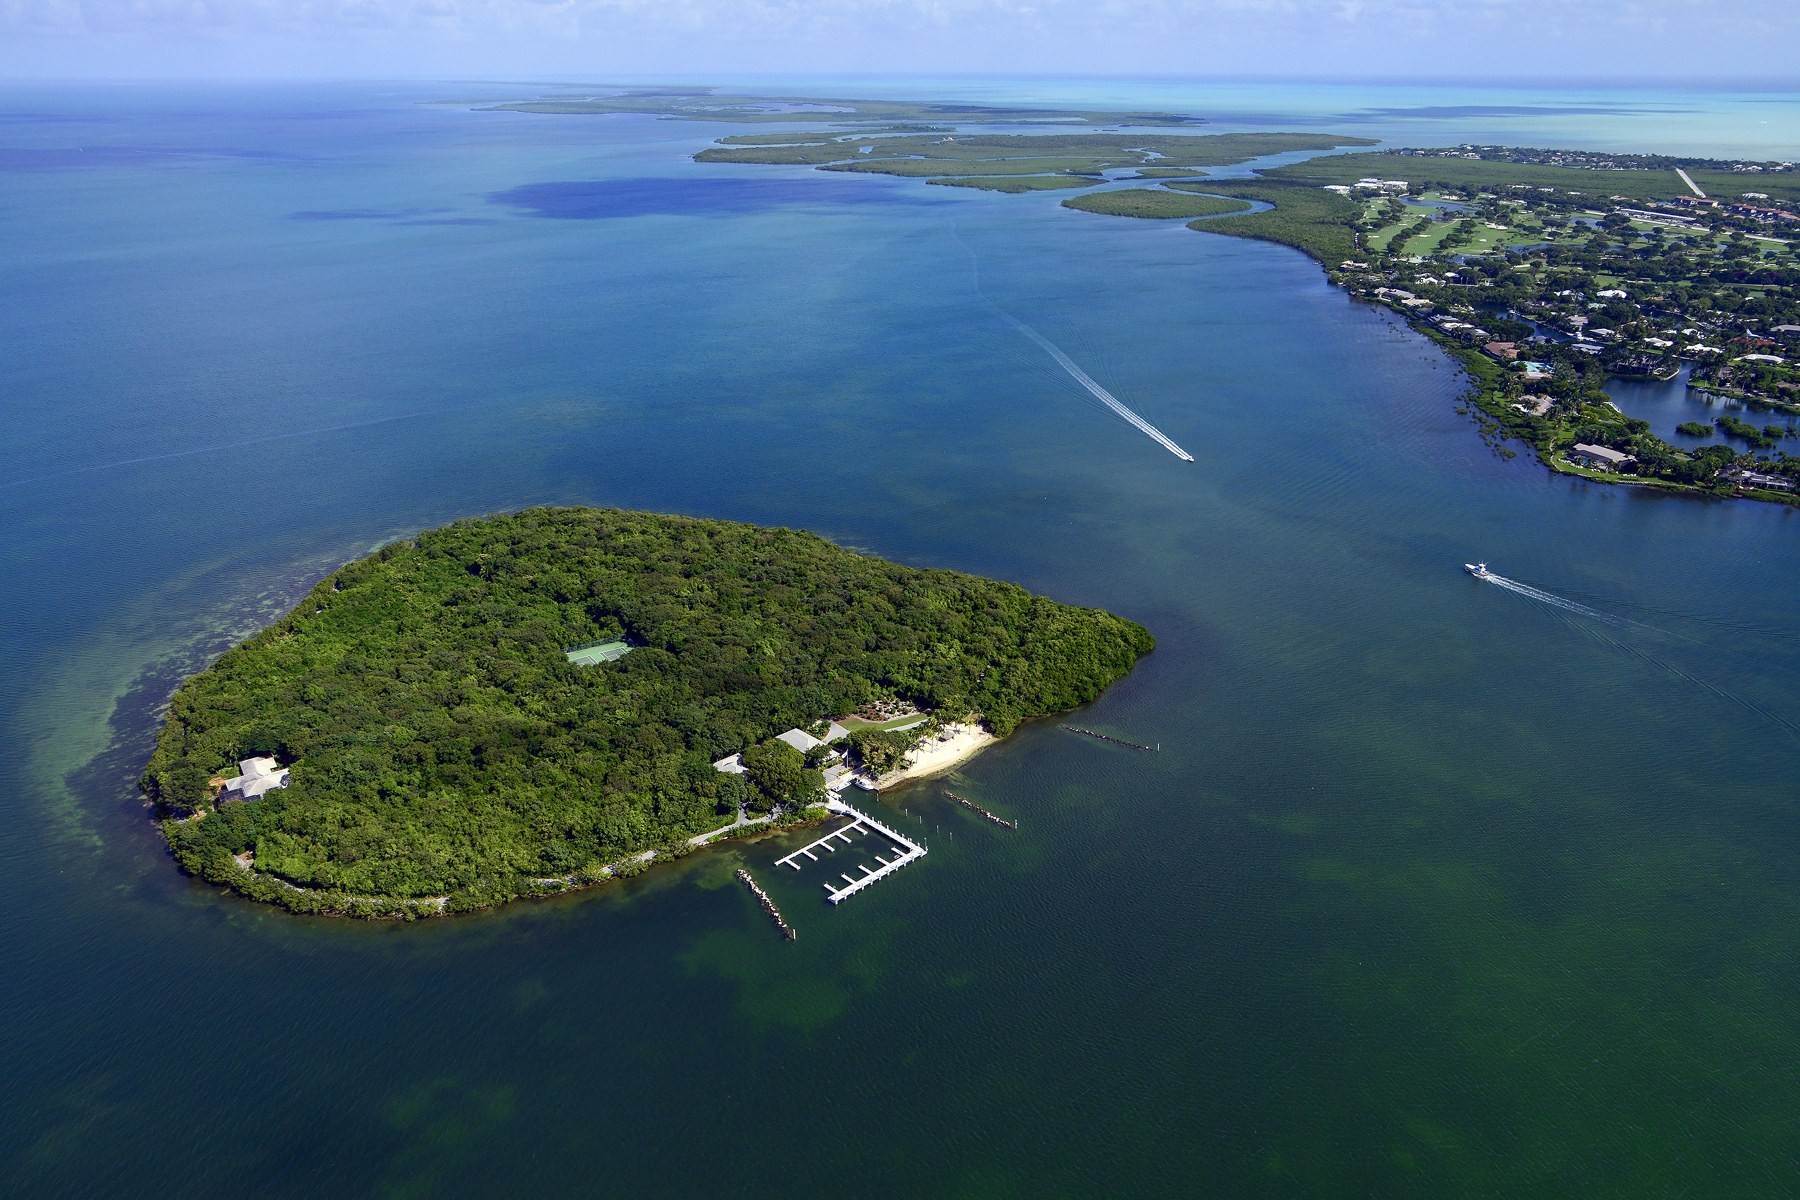 Property for Sale at Pumpkin Key - Private Island, Key Largo, FL Pumpkin Key - Private Island Key Largo, Florida 33037 United States